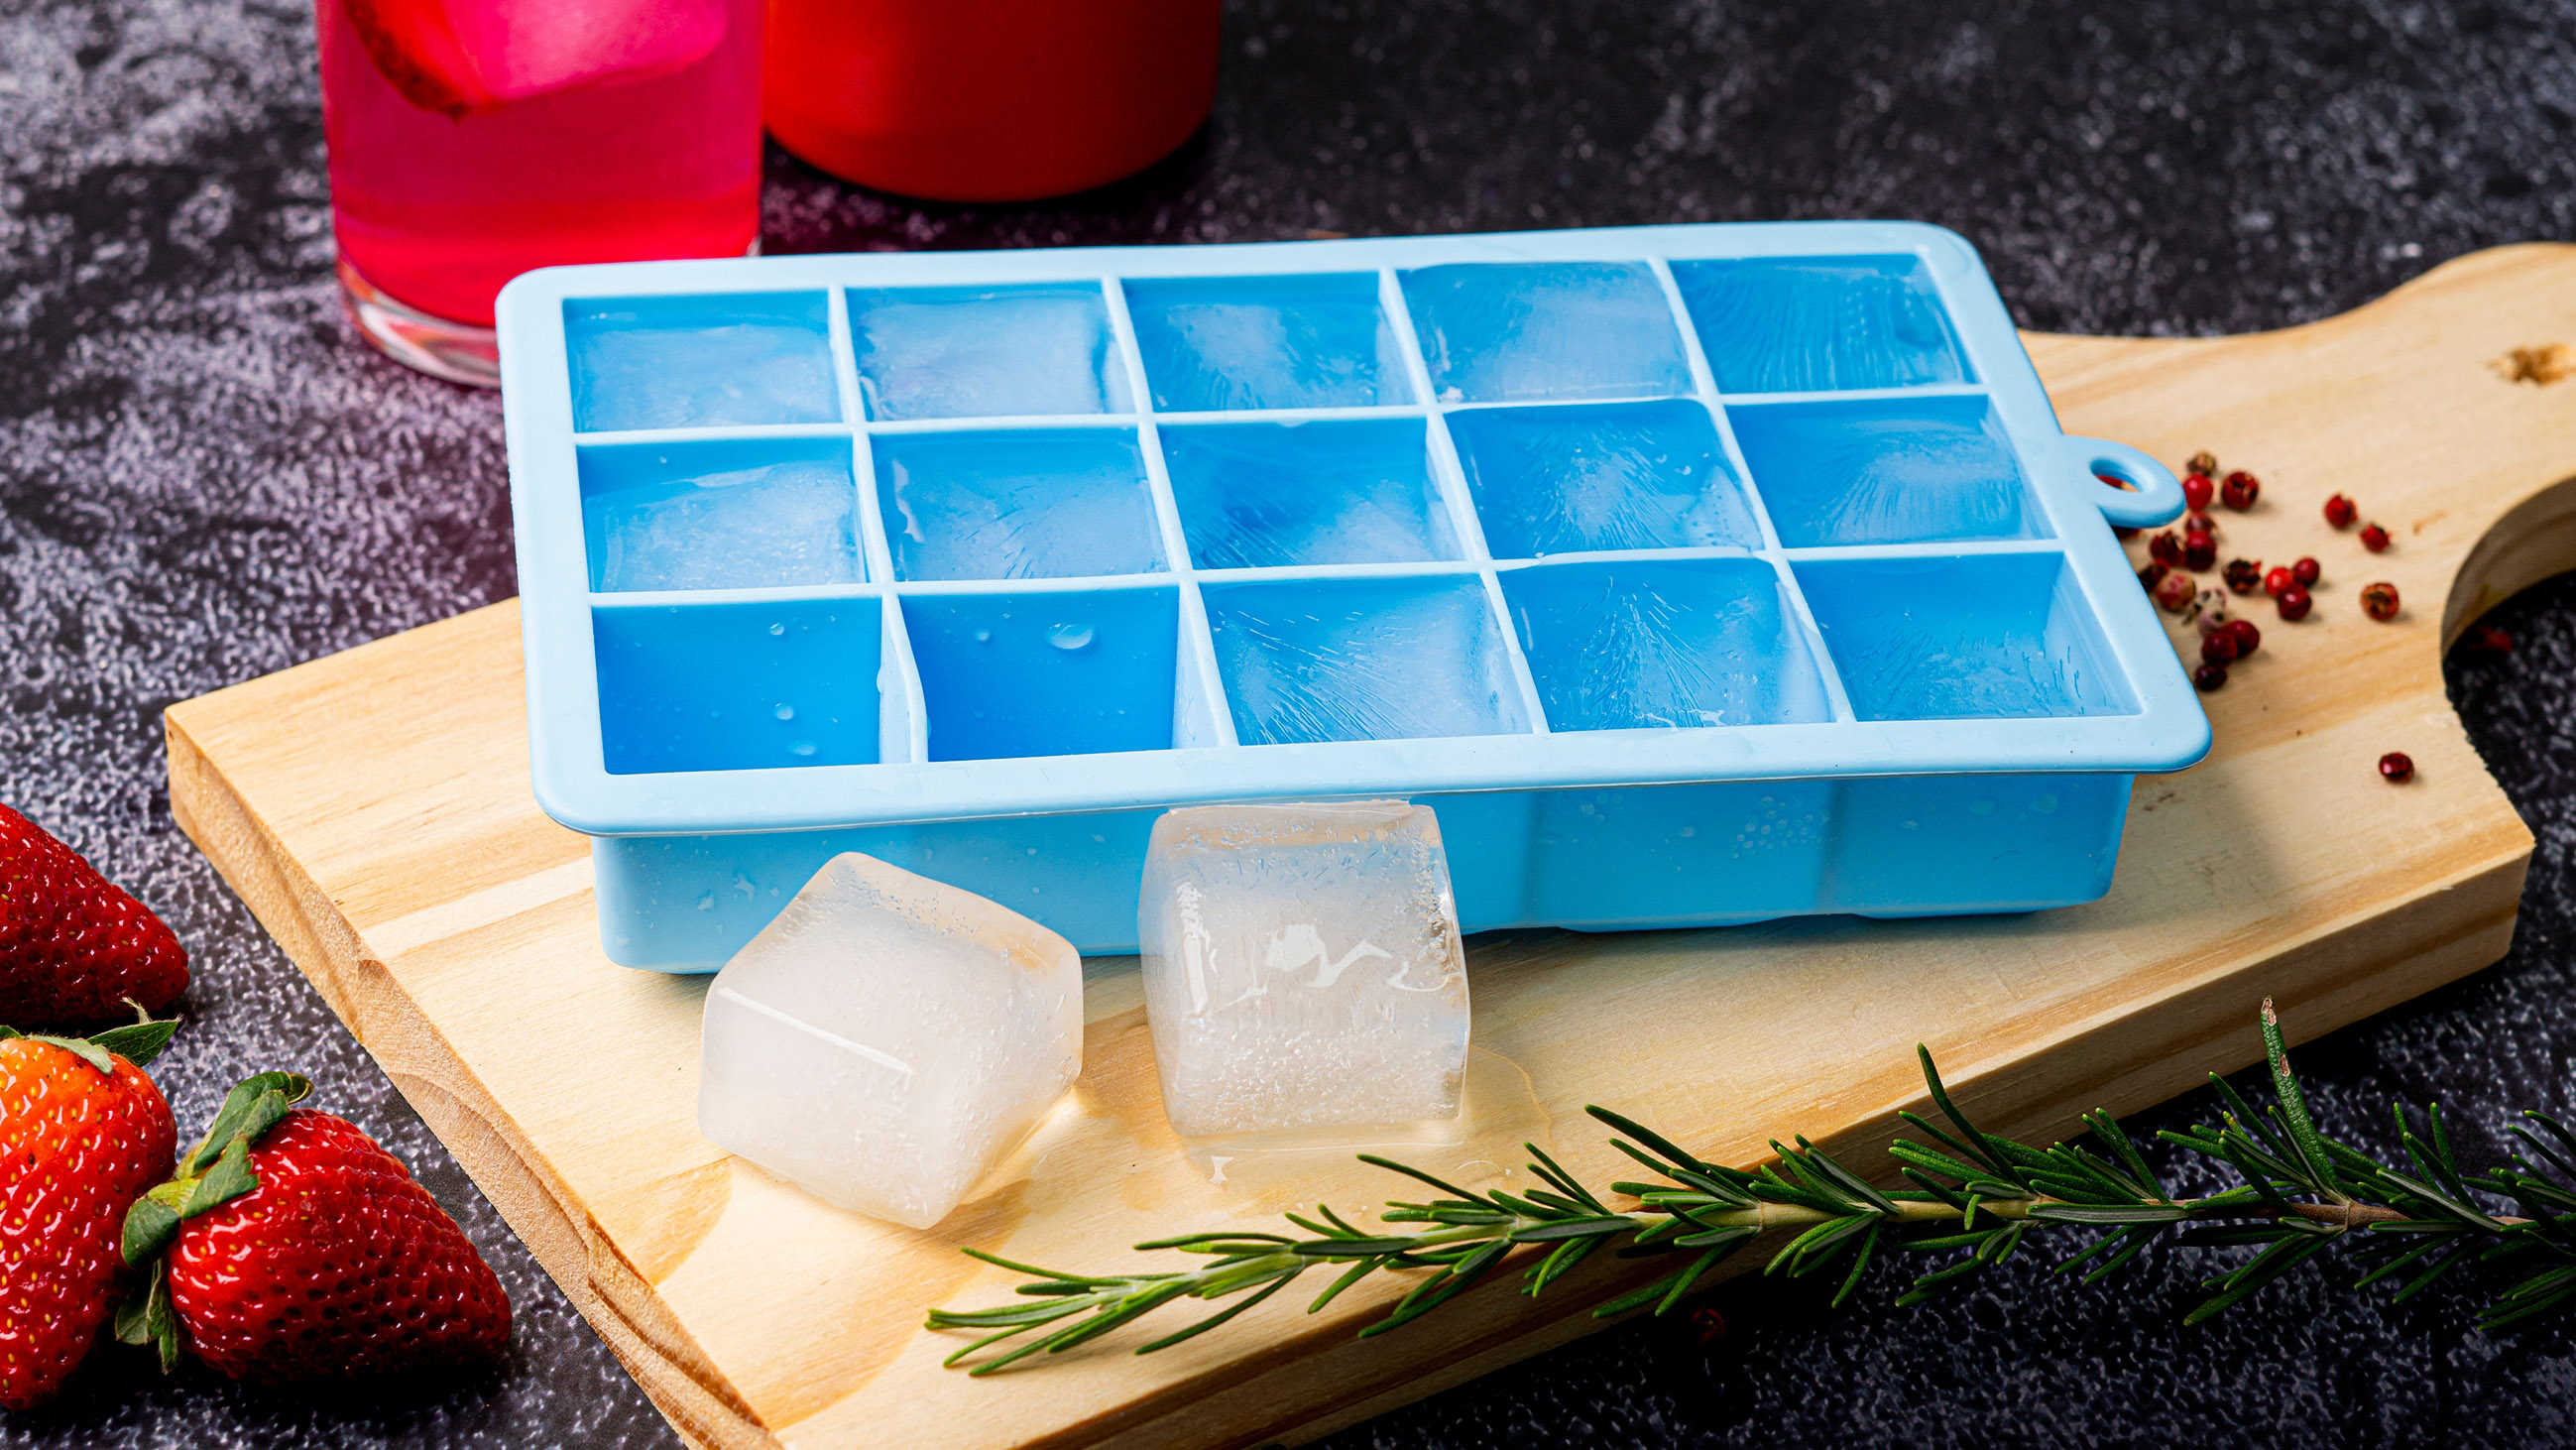 Pumpkin Shaped Ice Cube Tray With Built In Small Ice Trays for Mini Fridge